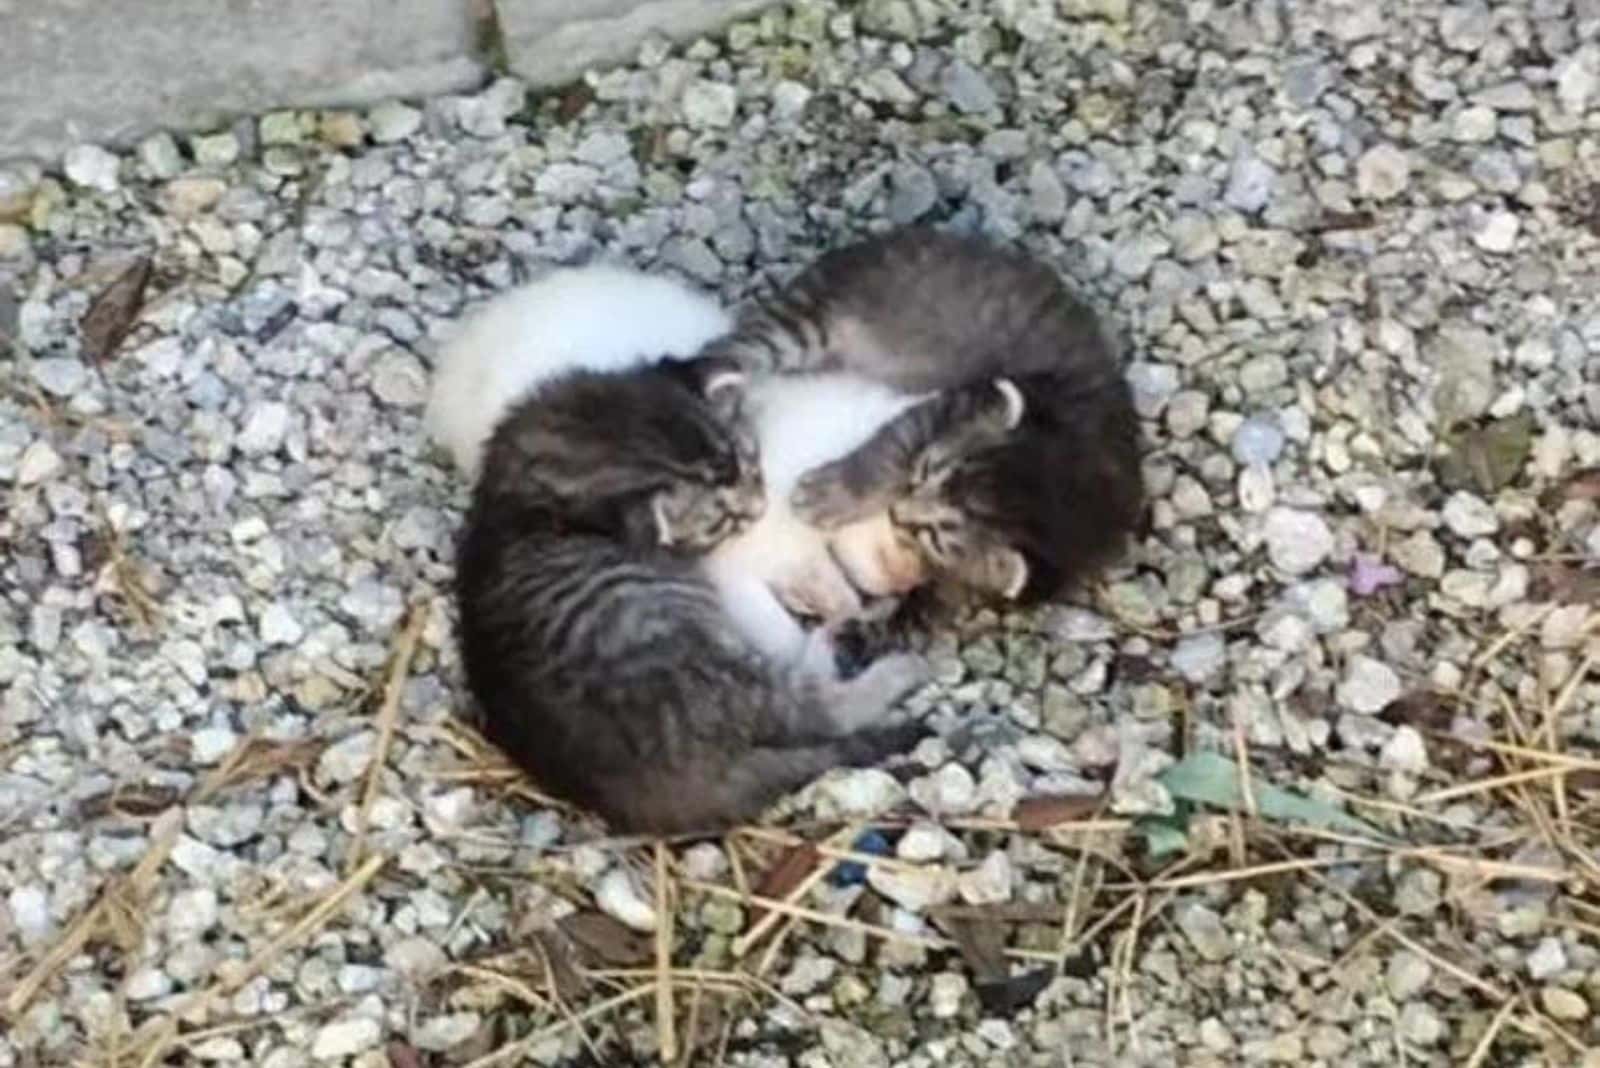 cats hug and warm themselves